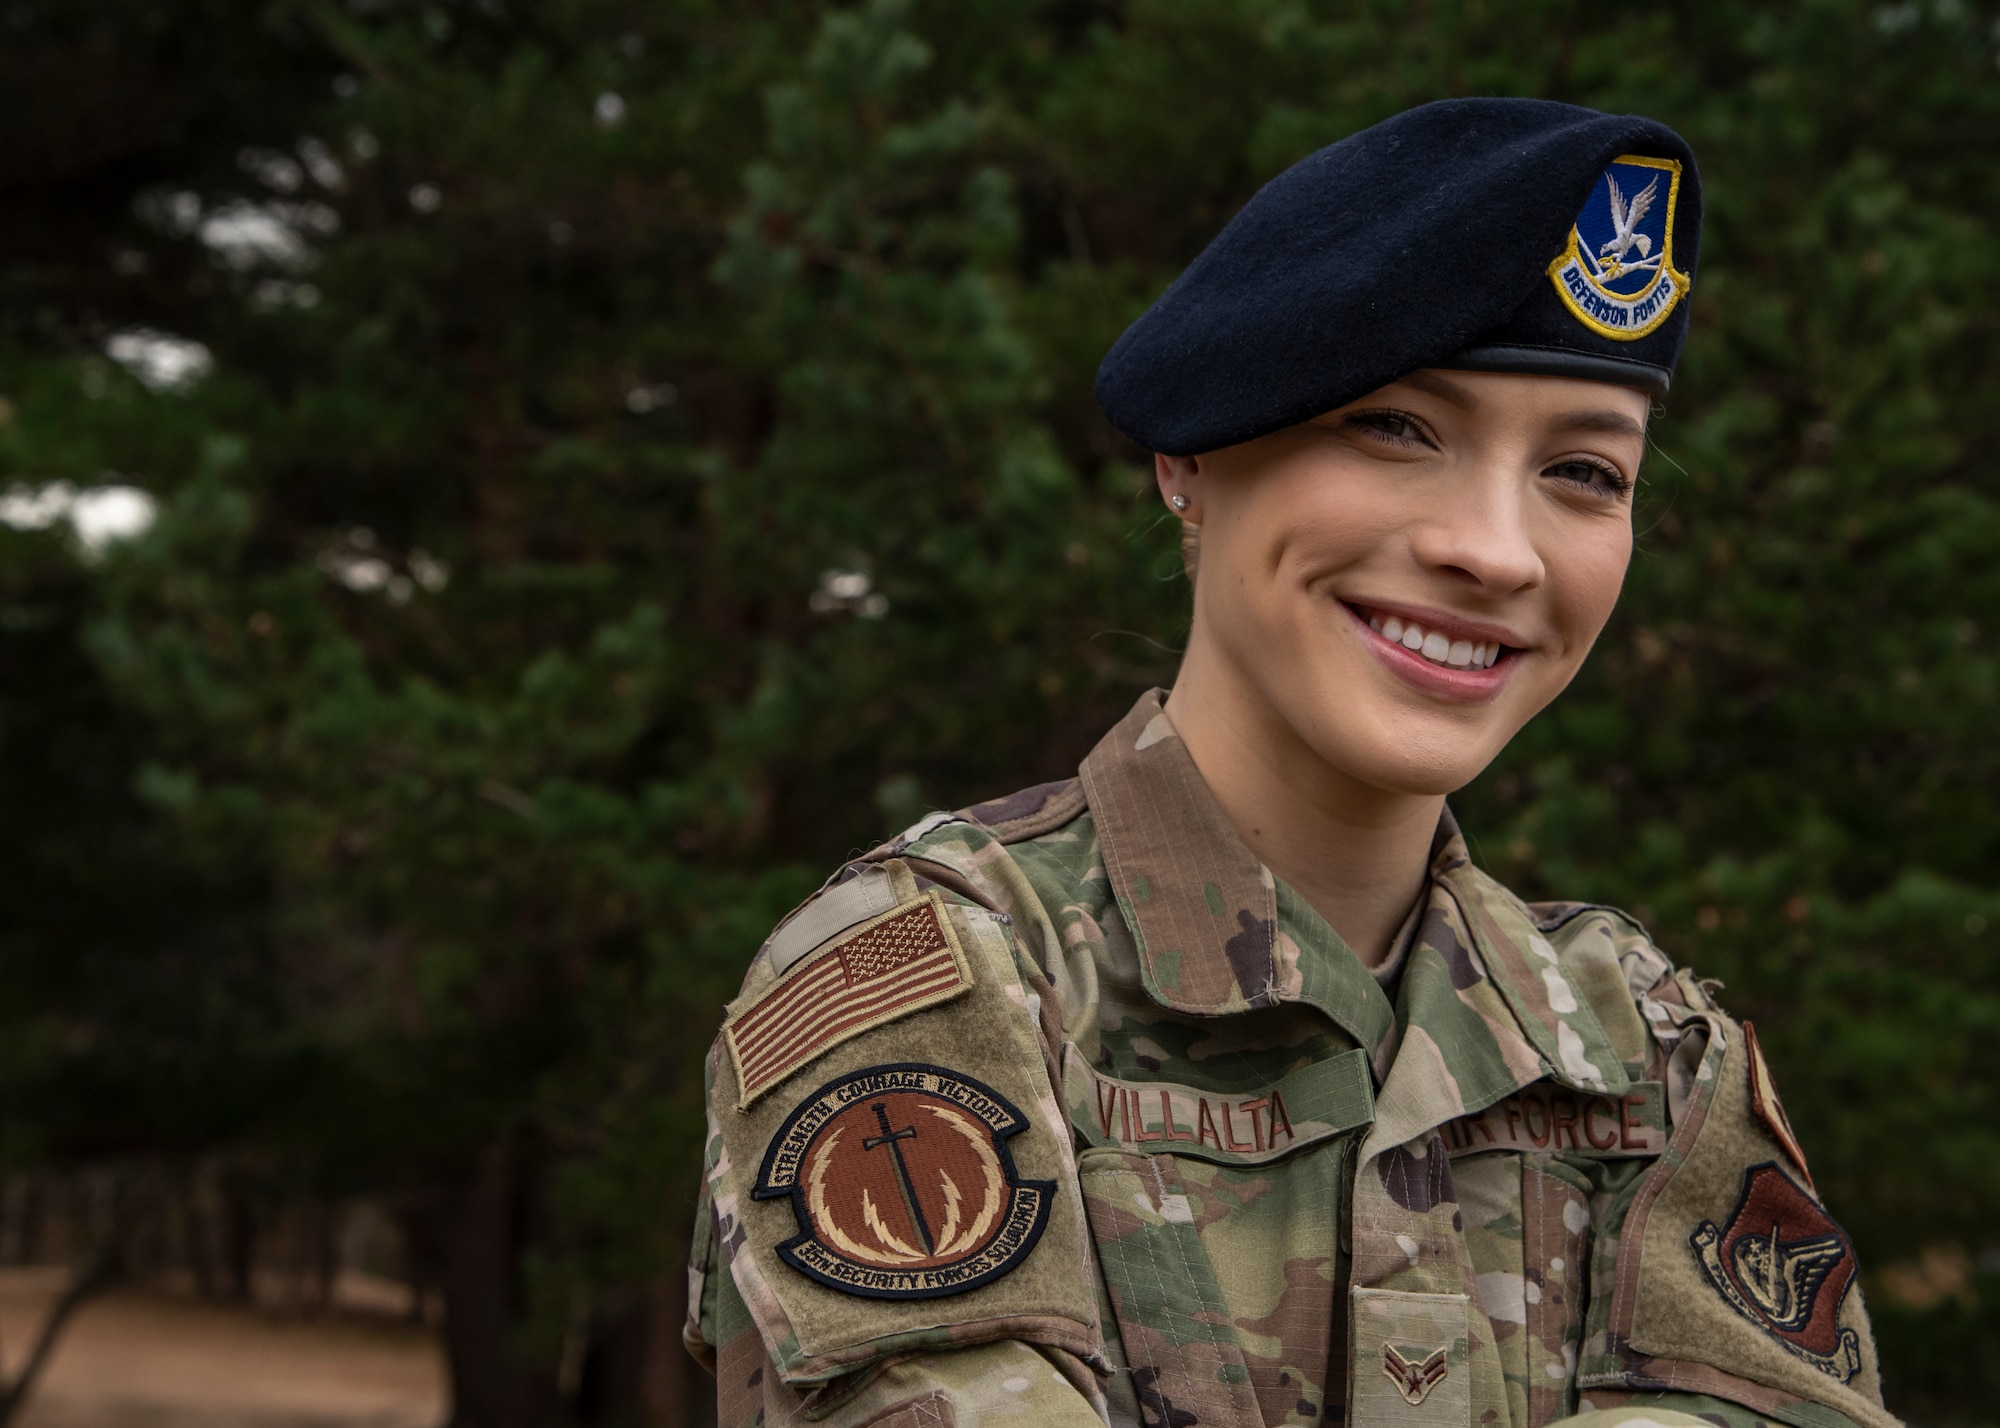 Airman 1st Class Holly Villalta, a 35th Security Forces Squadron base defense operations center controller, pauses for a photo at Misawa Air Base, Japan, Dec. 11, 2019. Villalta won the Outstanding Security Forces Flight Level Airman award. Villalta’s competitive spirit urged her to be a master at her craft, becoming certified in installation entry controller, alarm monitor, patrolman and BDOC controller. (U.S. Air Force photo by Airman 1st Class China M. Shock)